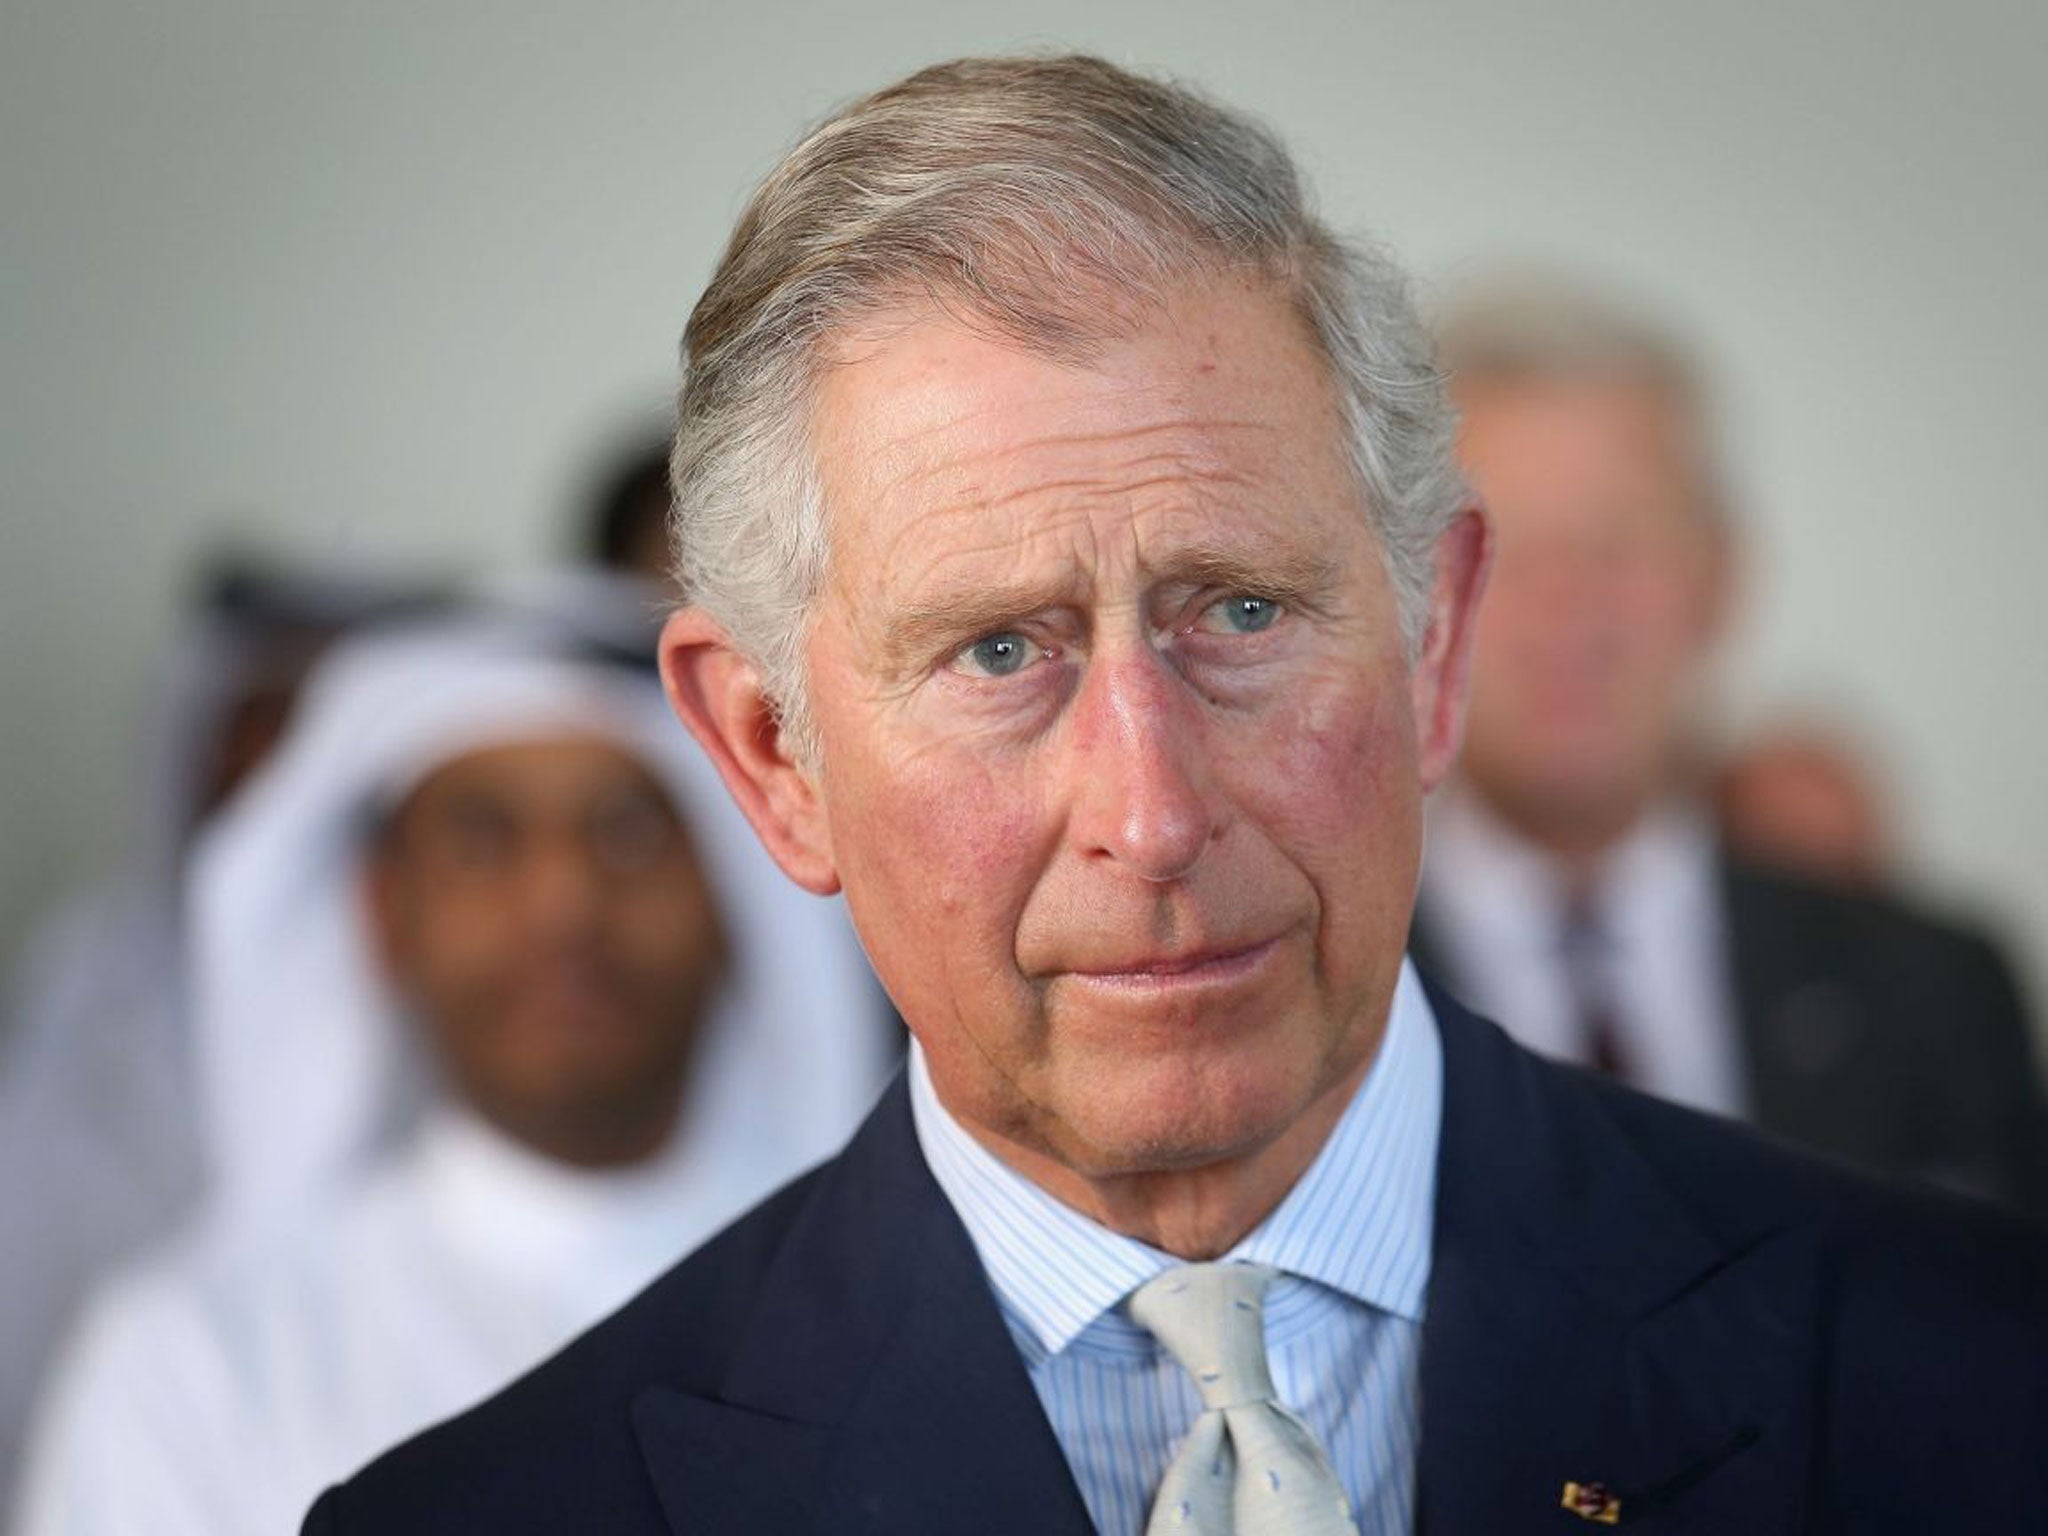 The Attorney General's decision to block the publication of letters written by Prince Charles has been upheld by a High Court